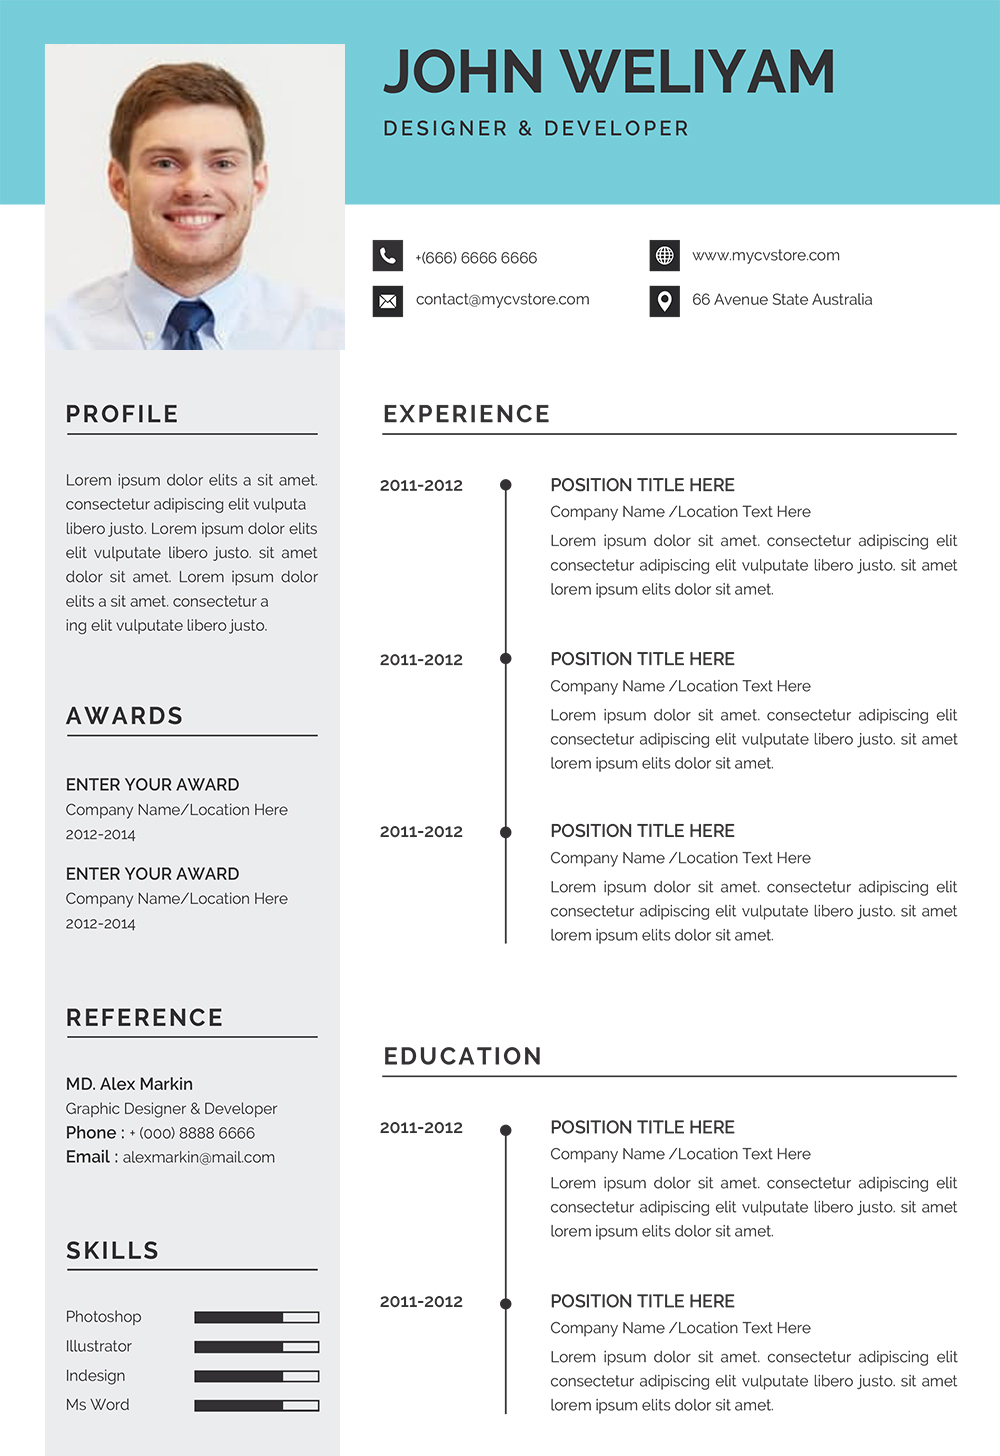 download free modern professional resume template filetypedocx